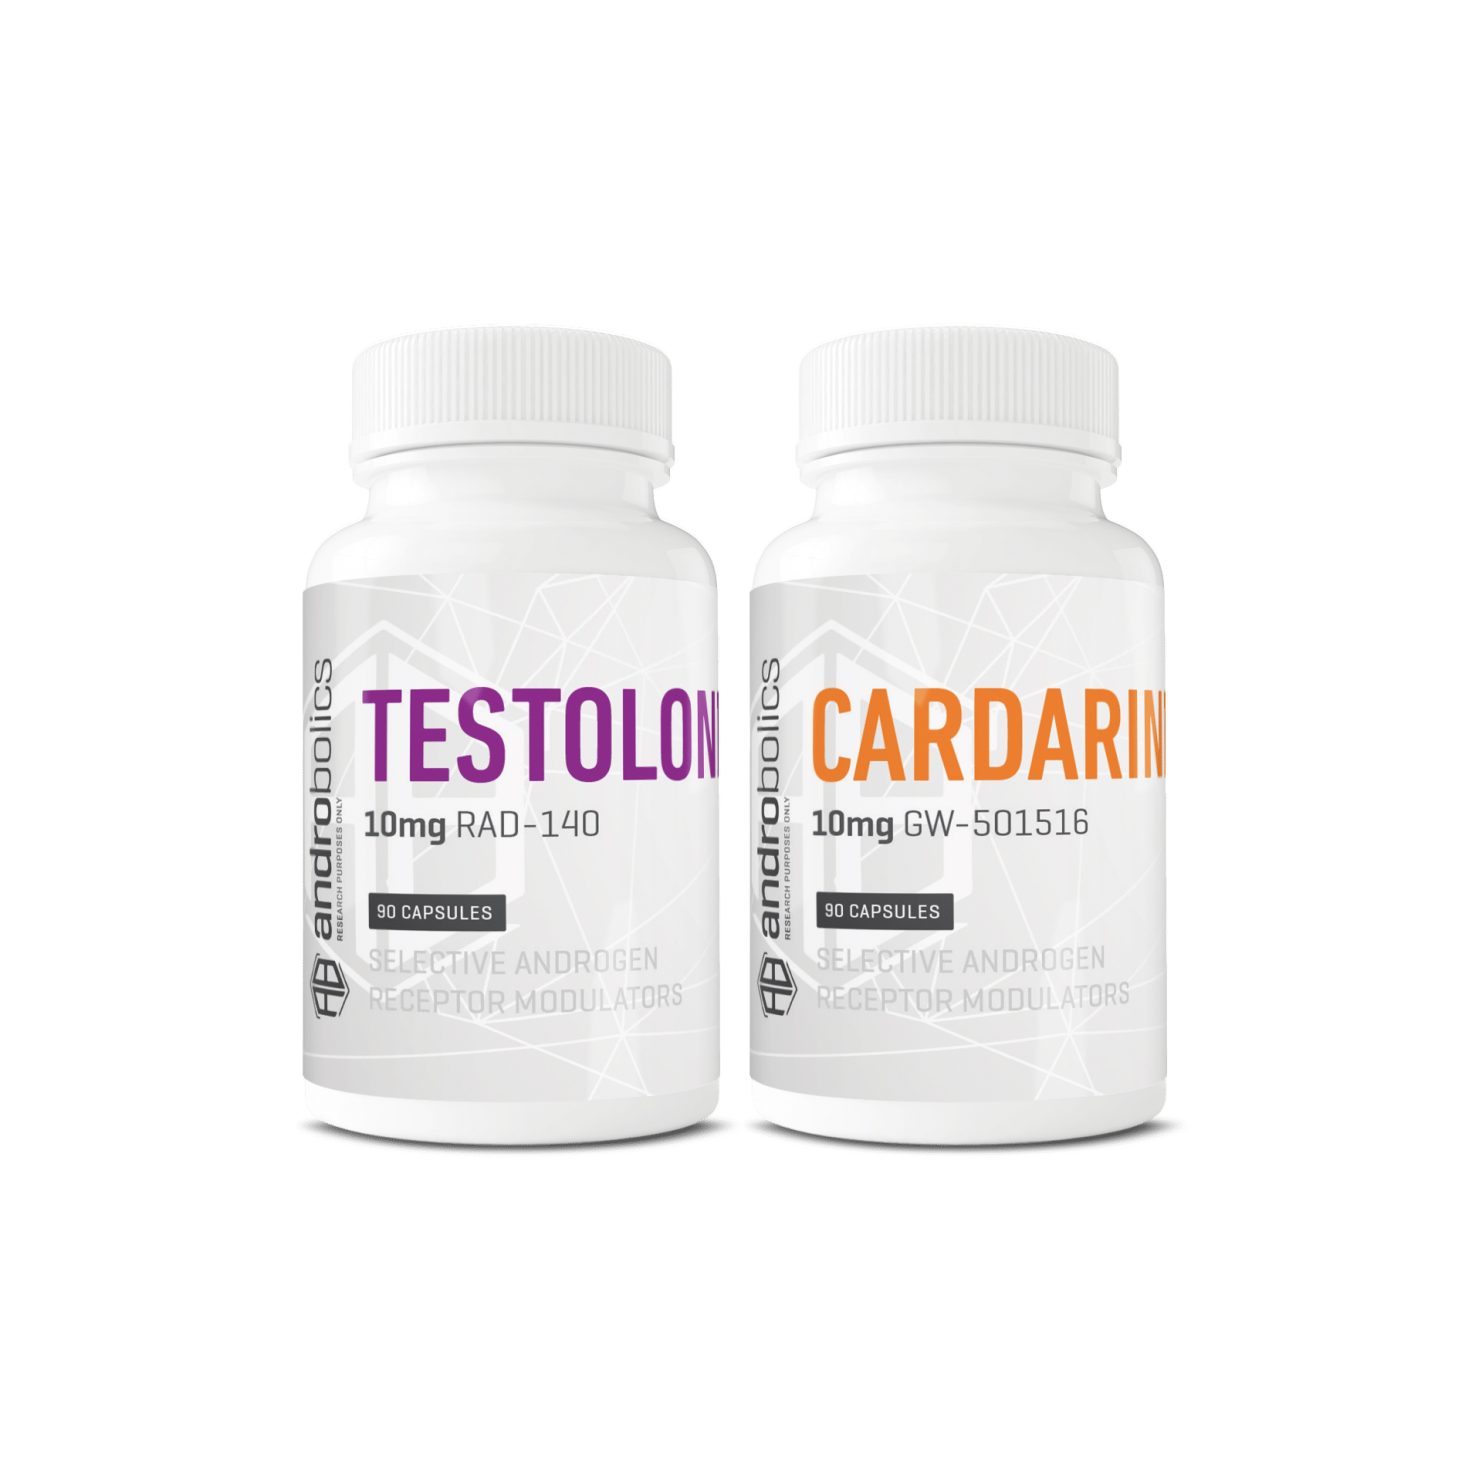 Athlete SARMs Stack with Cardarine and Testolone bottles from Androbolics.